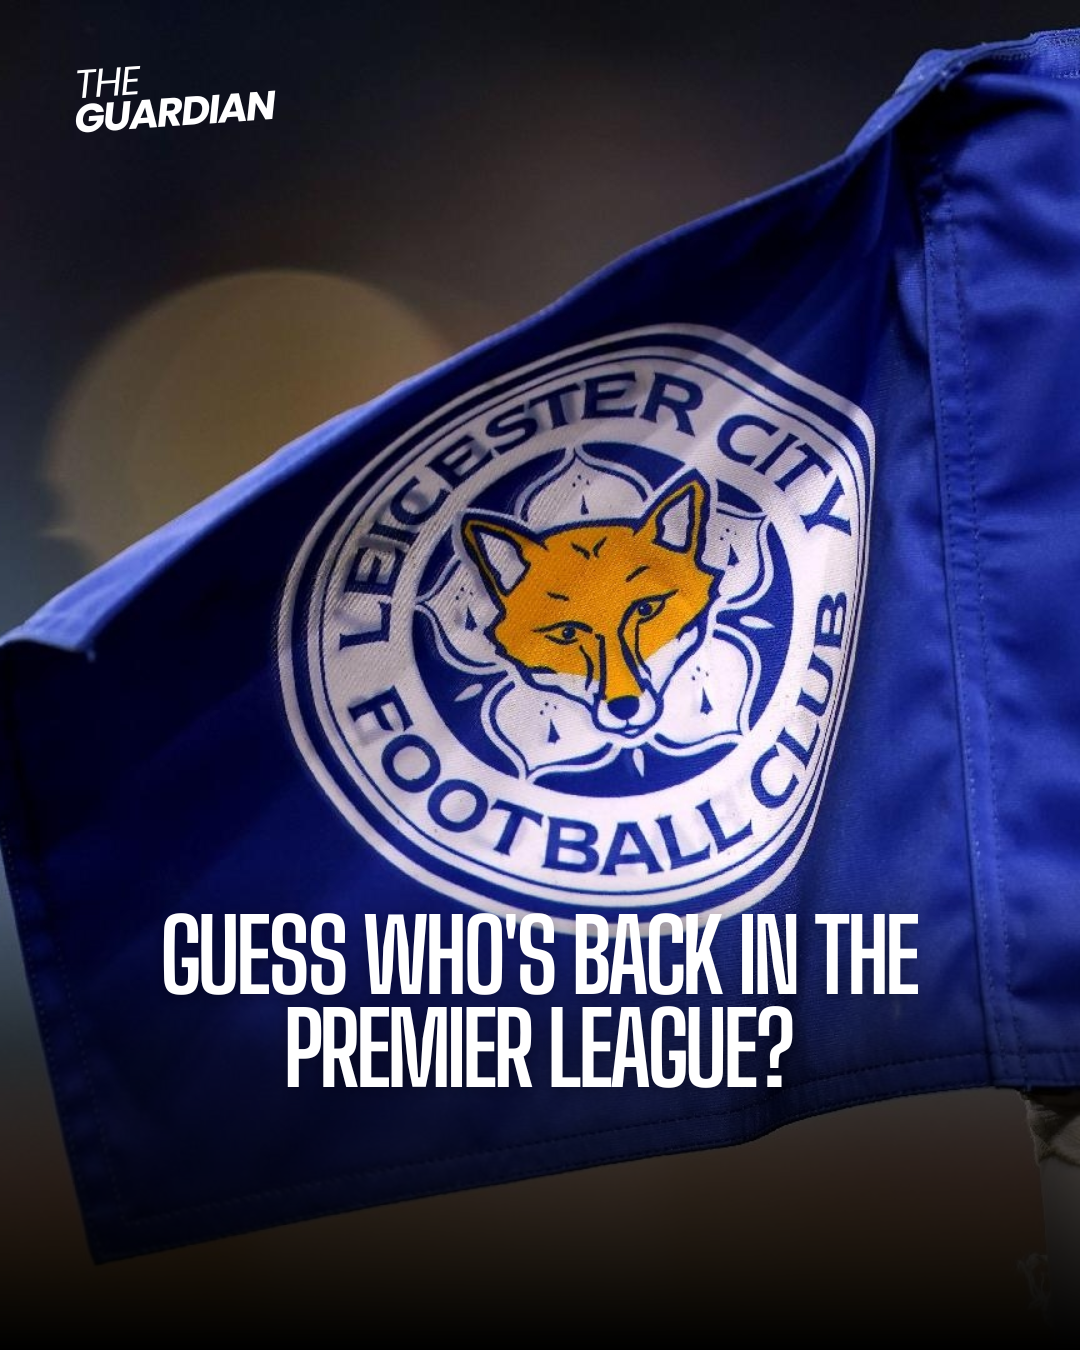 Leicester City has been promoted to the Premier League after Leeds United was beaten by Queens Park Rangers.